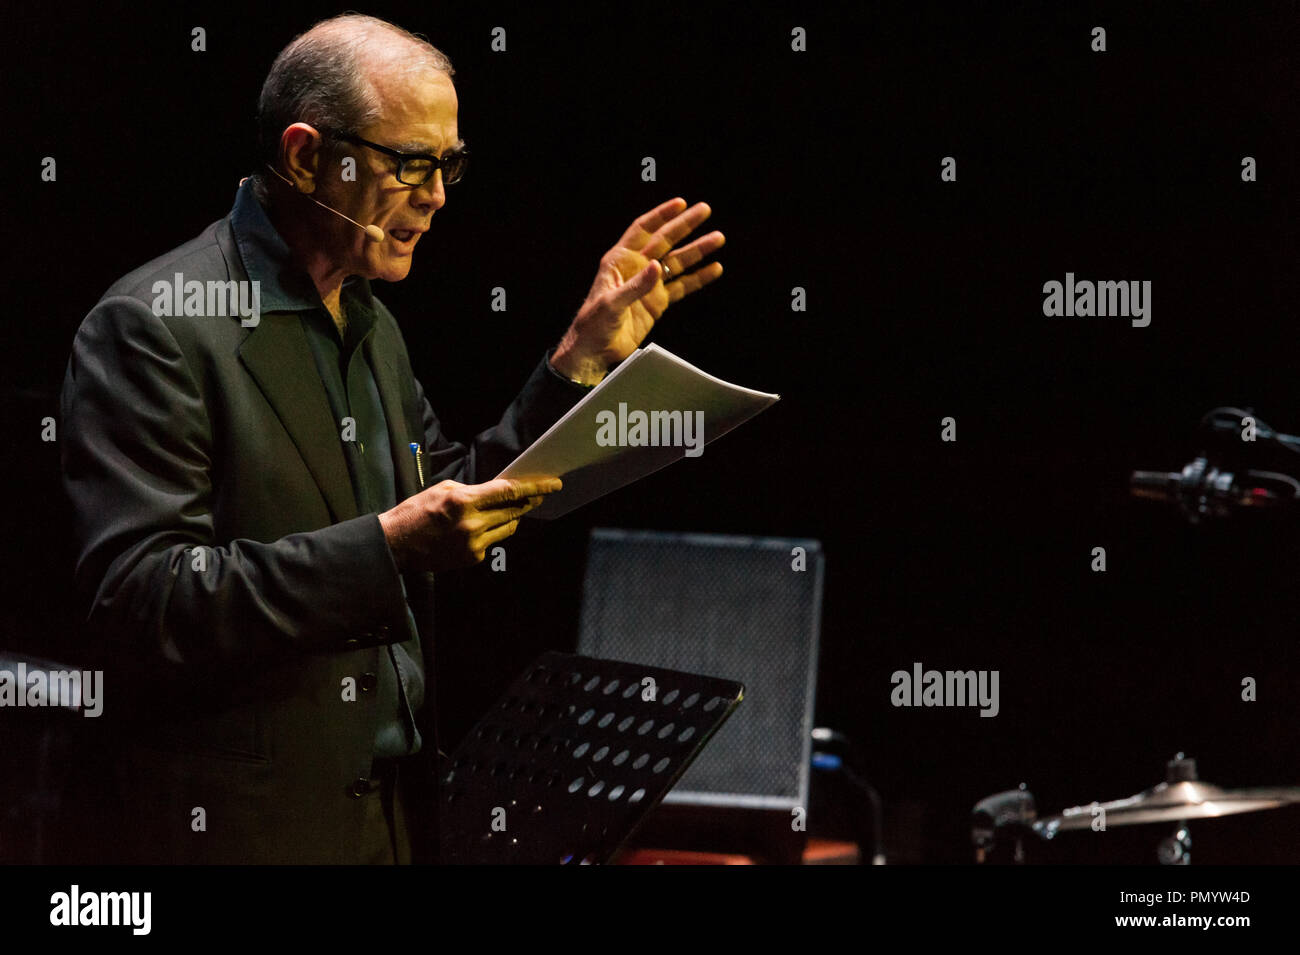 Danilo Rea at the piano and Urbano Barberini, narrator, presented on 18/9/2018 at the Auditorium Parco della Musica in Rome at the Franco-Italian Festival of jazz and improvised music 'Una striscia di Terra Feconda', the pièce by Nello Trocchia (journalist and writer threatened by the Camorra for his own writings), 'The ruins of Hadrian'. Voice narrator Urbano Barberini, who interacted with the improvisations of the pianist Danilo Rea. The pièce tells of an important victory of civil society on business policy, which had planned to build a landfill at the Hadrian's Villa, Unesco site. Urbano B Stock Photo